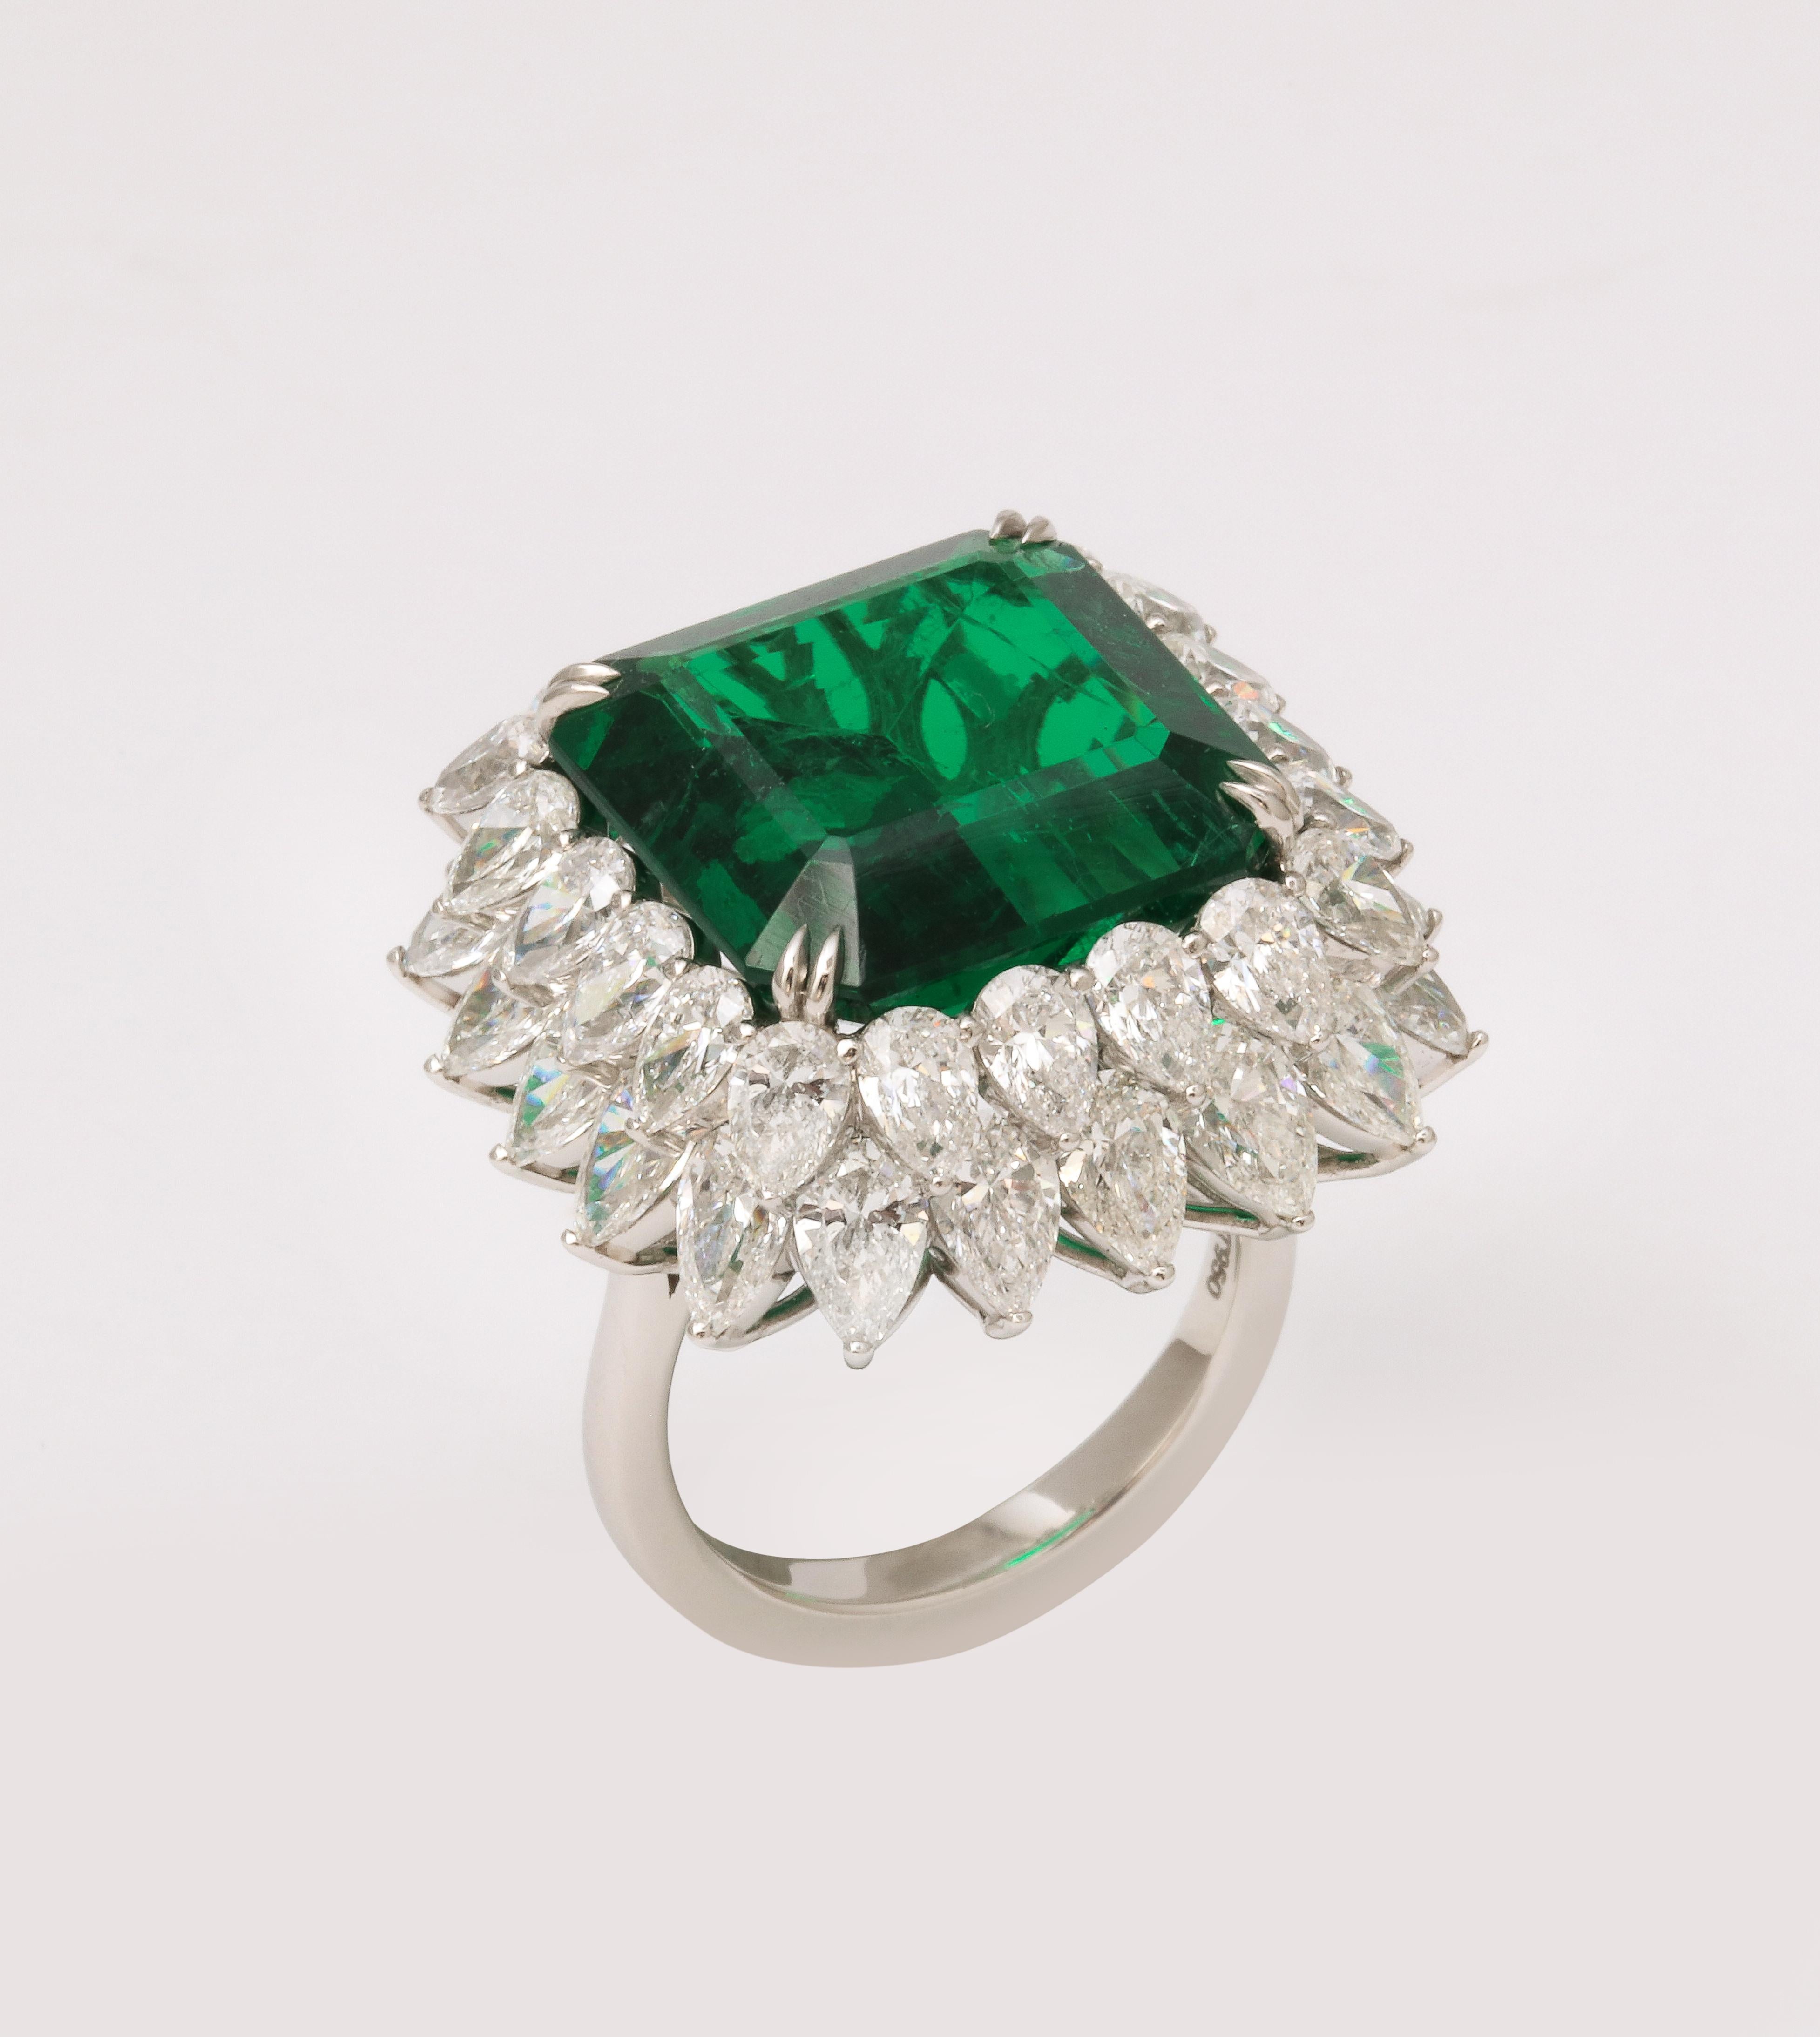 13 carat Emerald and Diamond Ring  For Sale 4